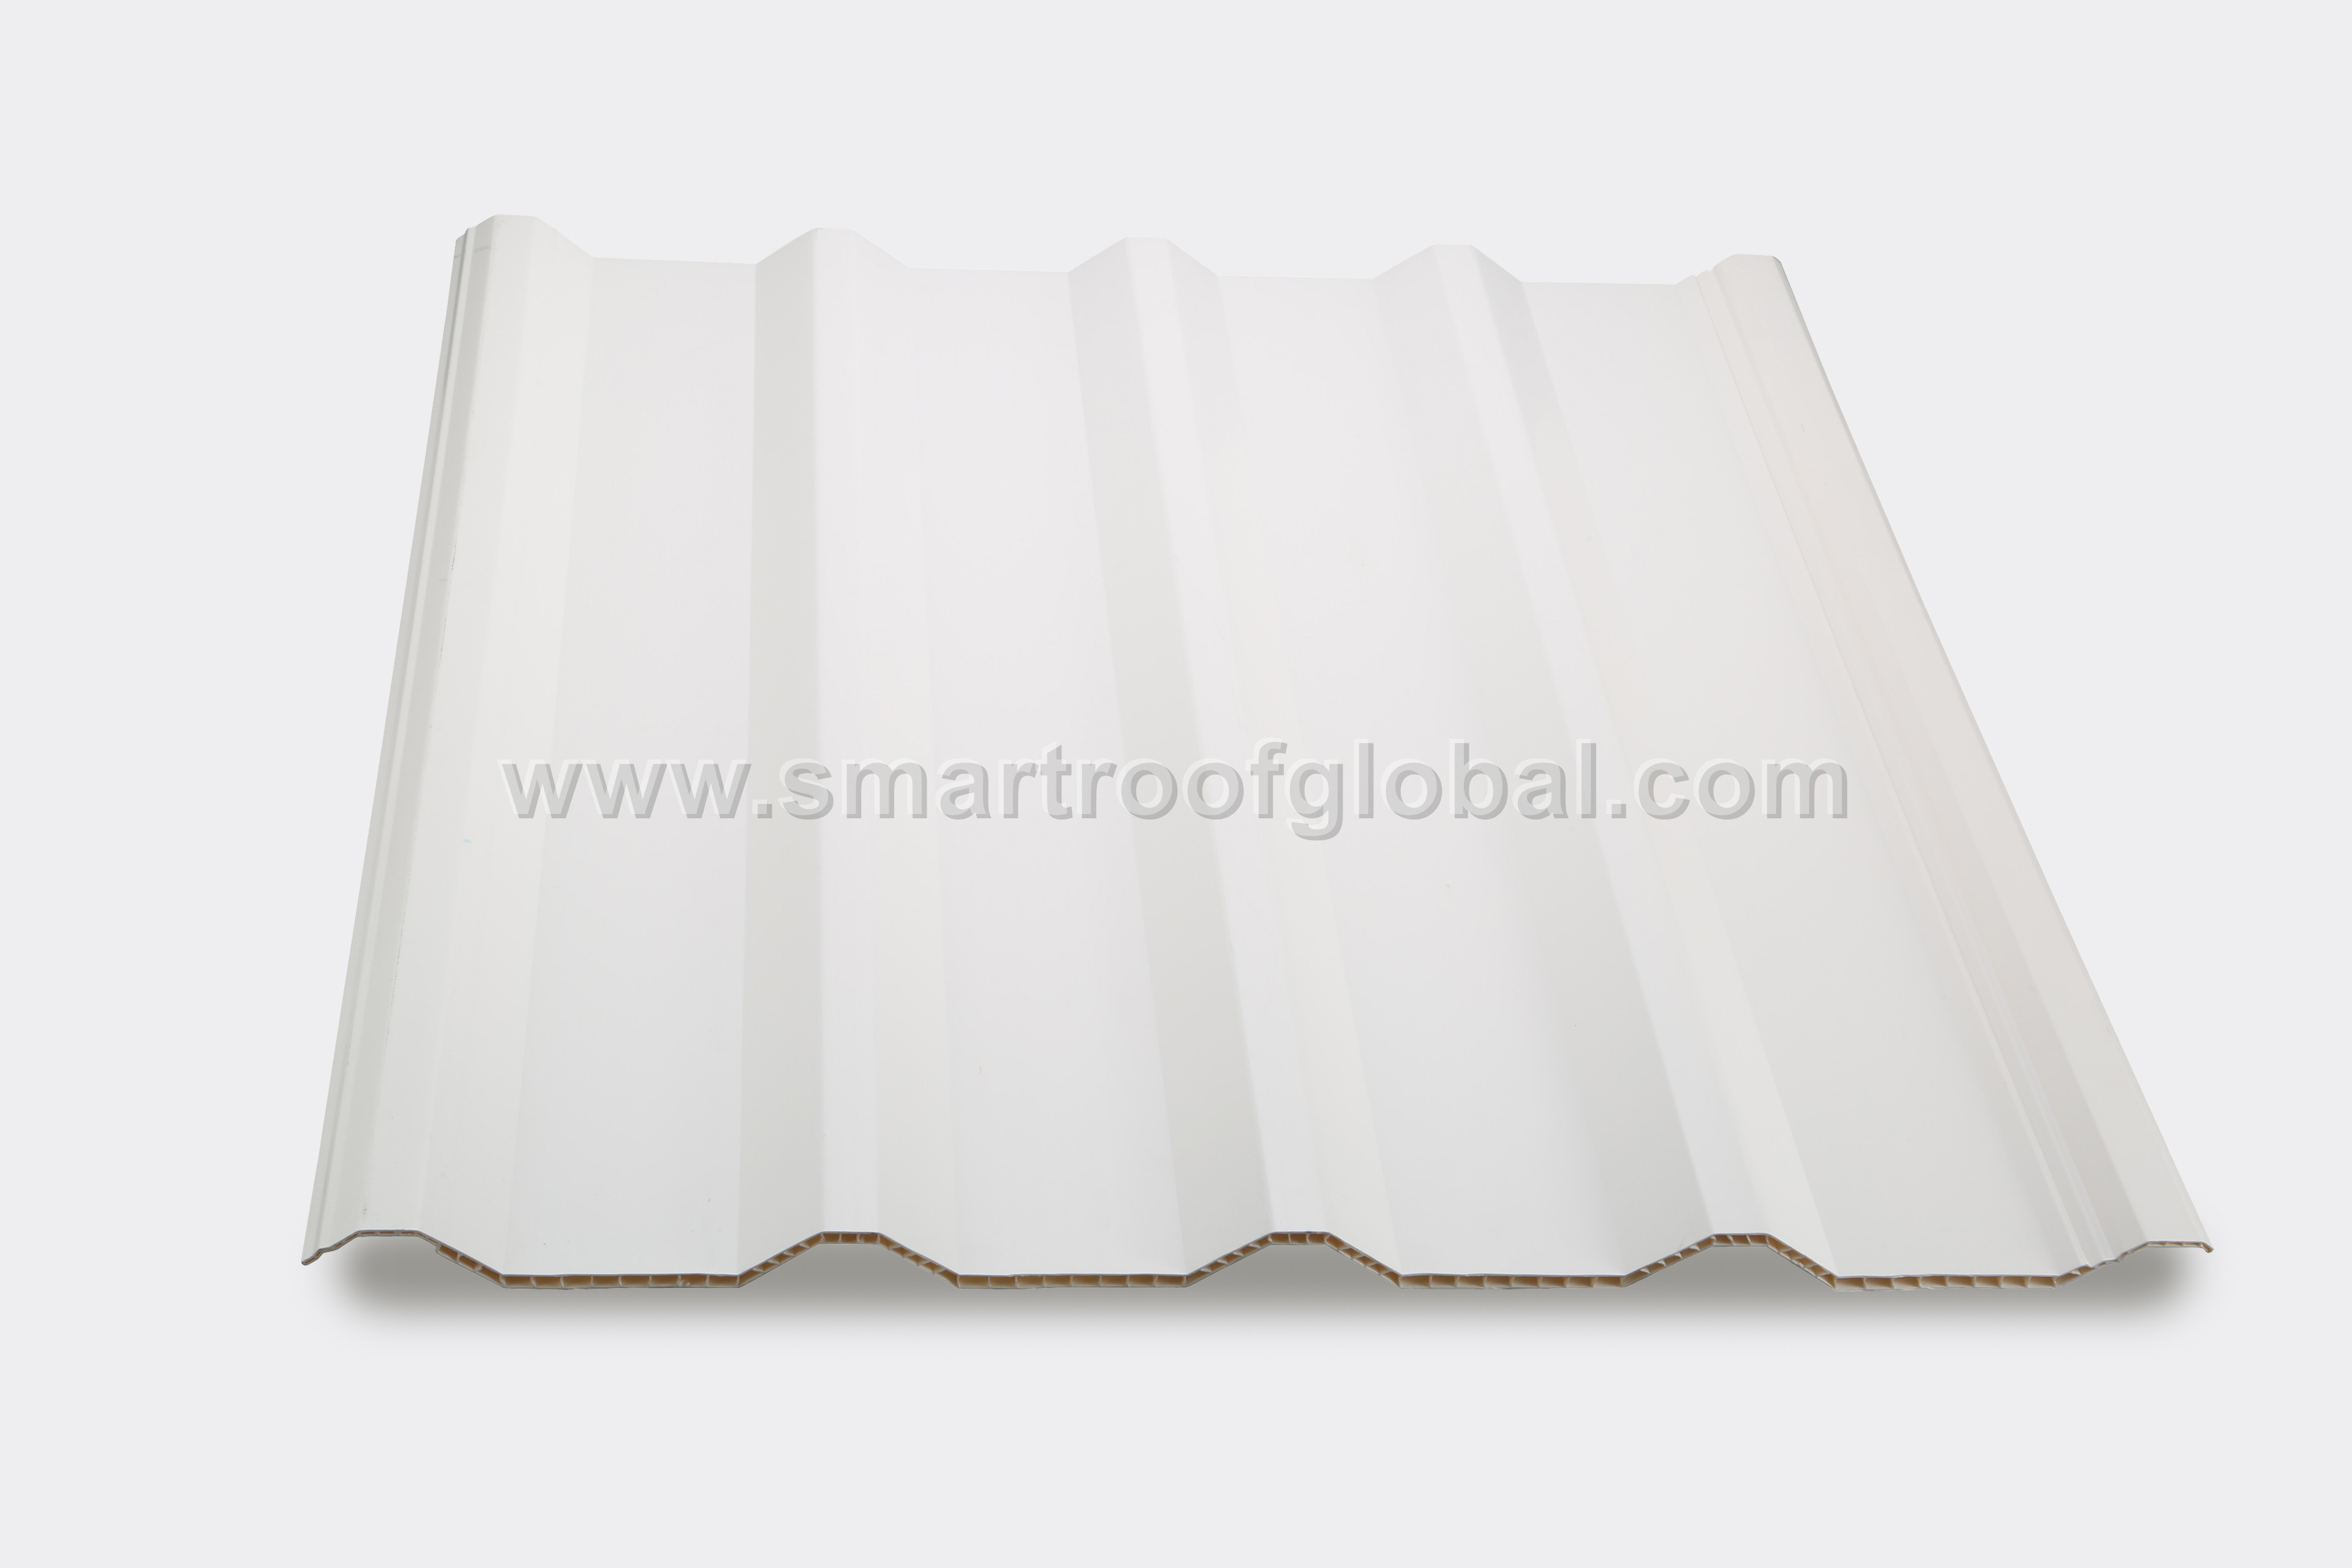 Wholesale Dealers of Pvc Corrugated Roofing Sheets - Polycarbonate Roof – Smartroof